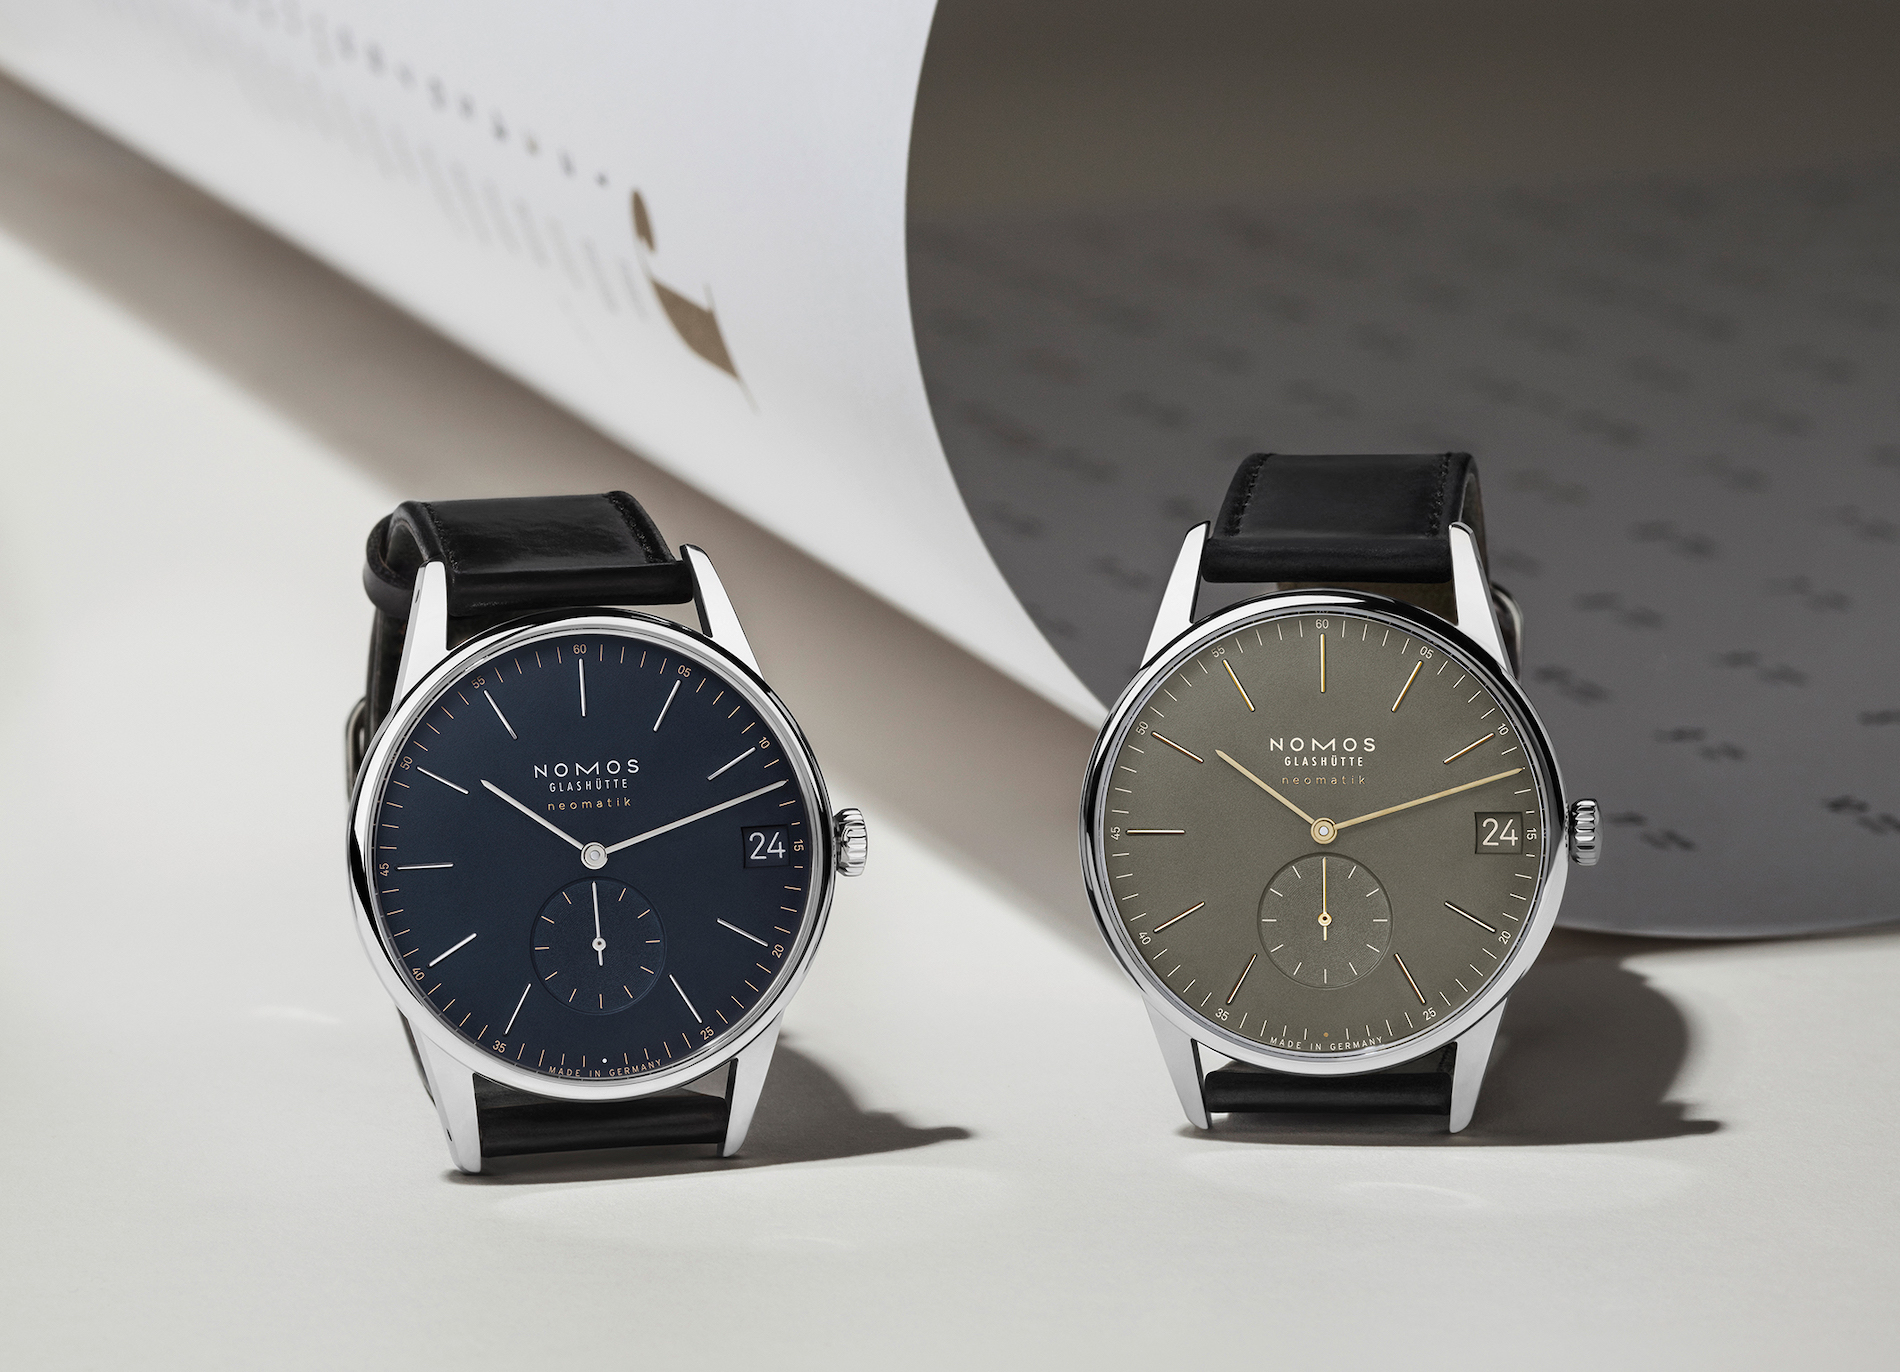 Nomos Orion Neomatik 41 Date Watch In Midnight Blue And Olive Green